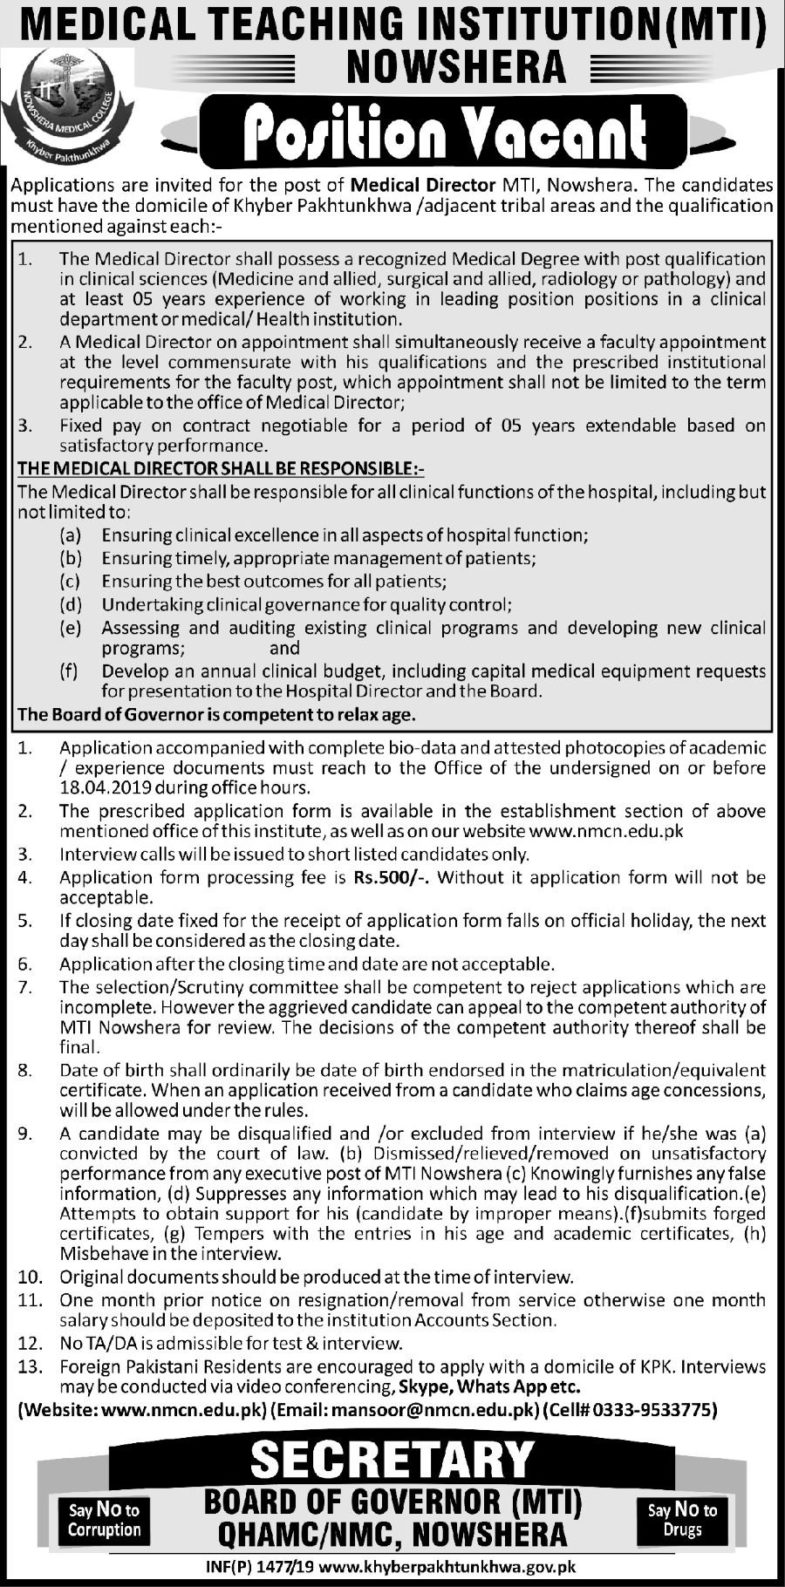 Medical Teaching Institution Nowshera Jobs 2019 for the post of Medical Director